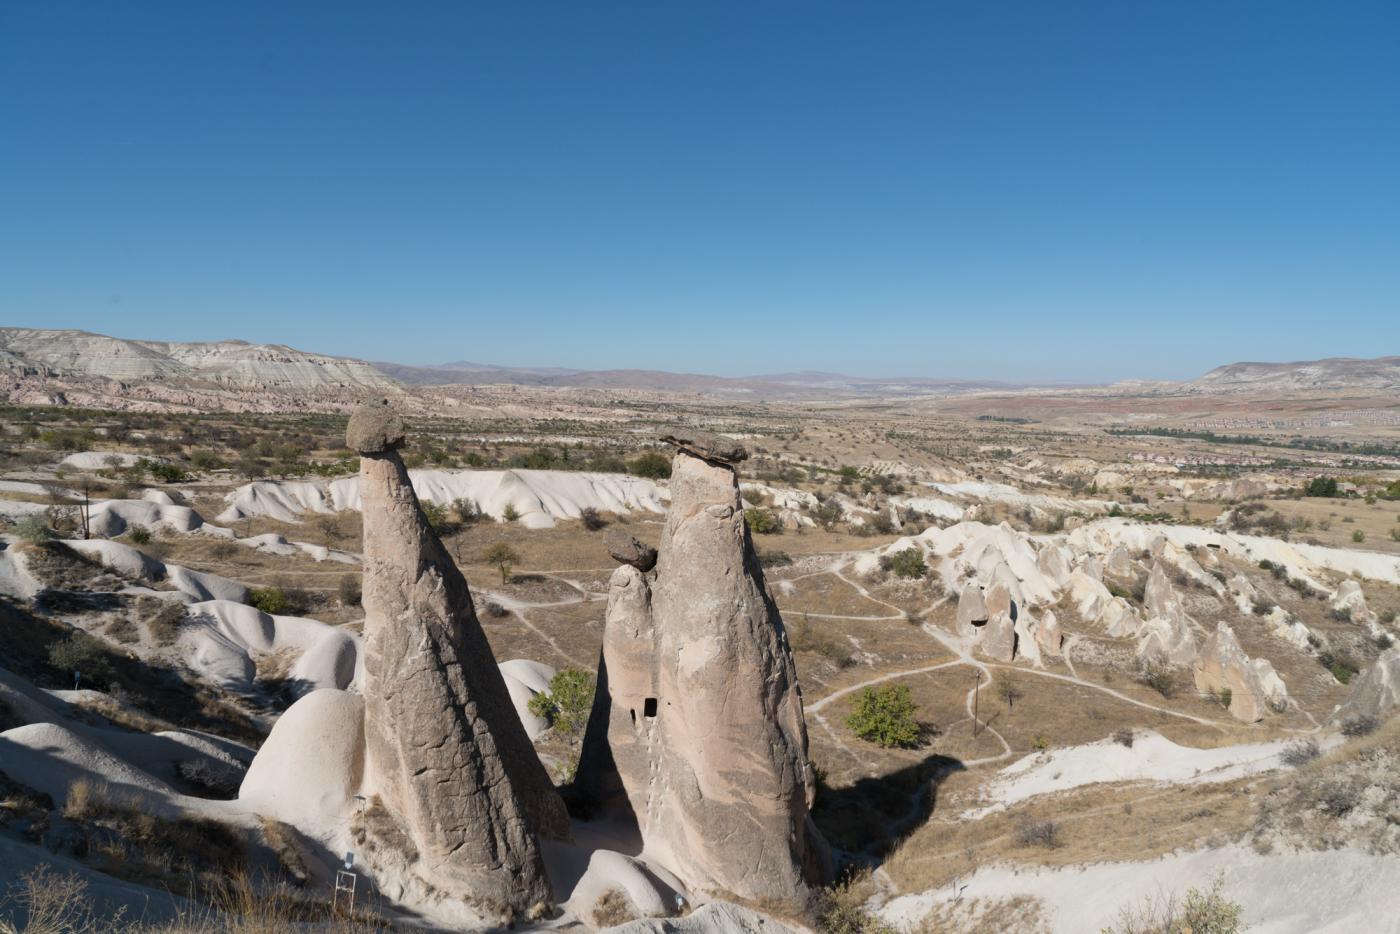 Three Graces, a viewpoint along the road in Cappadocia, Turkey